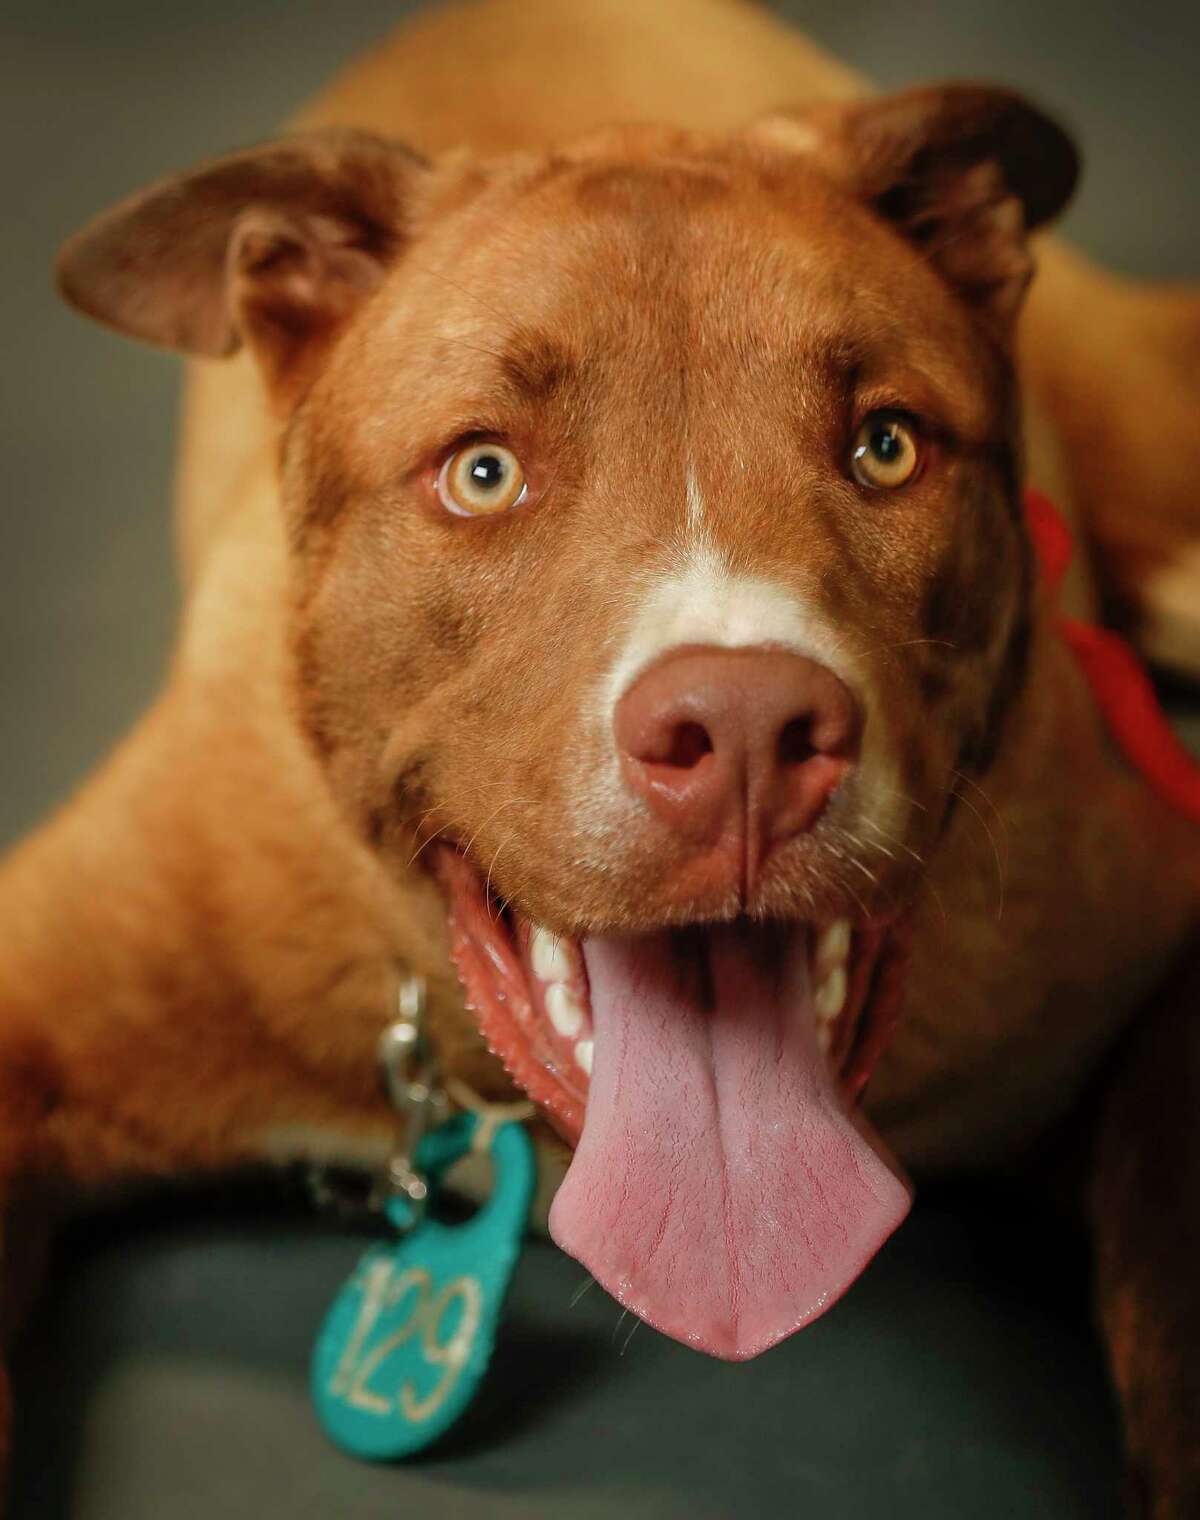 Raven is a 8-month-old, male, Pit Bull mix available for adoption at the Harris County Animal Shelter, in Houston. (Animal ID: A534368) Photographed Tuesday June 4, 2019. Raven is a large lovebug during the photoshoot he exhausted himself by playing with sqweeky toys, and devoring treats, and getting bear hugs.